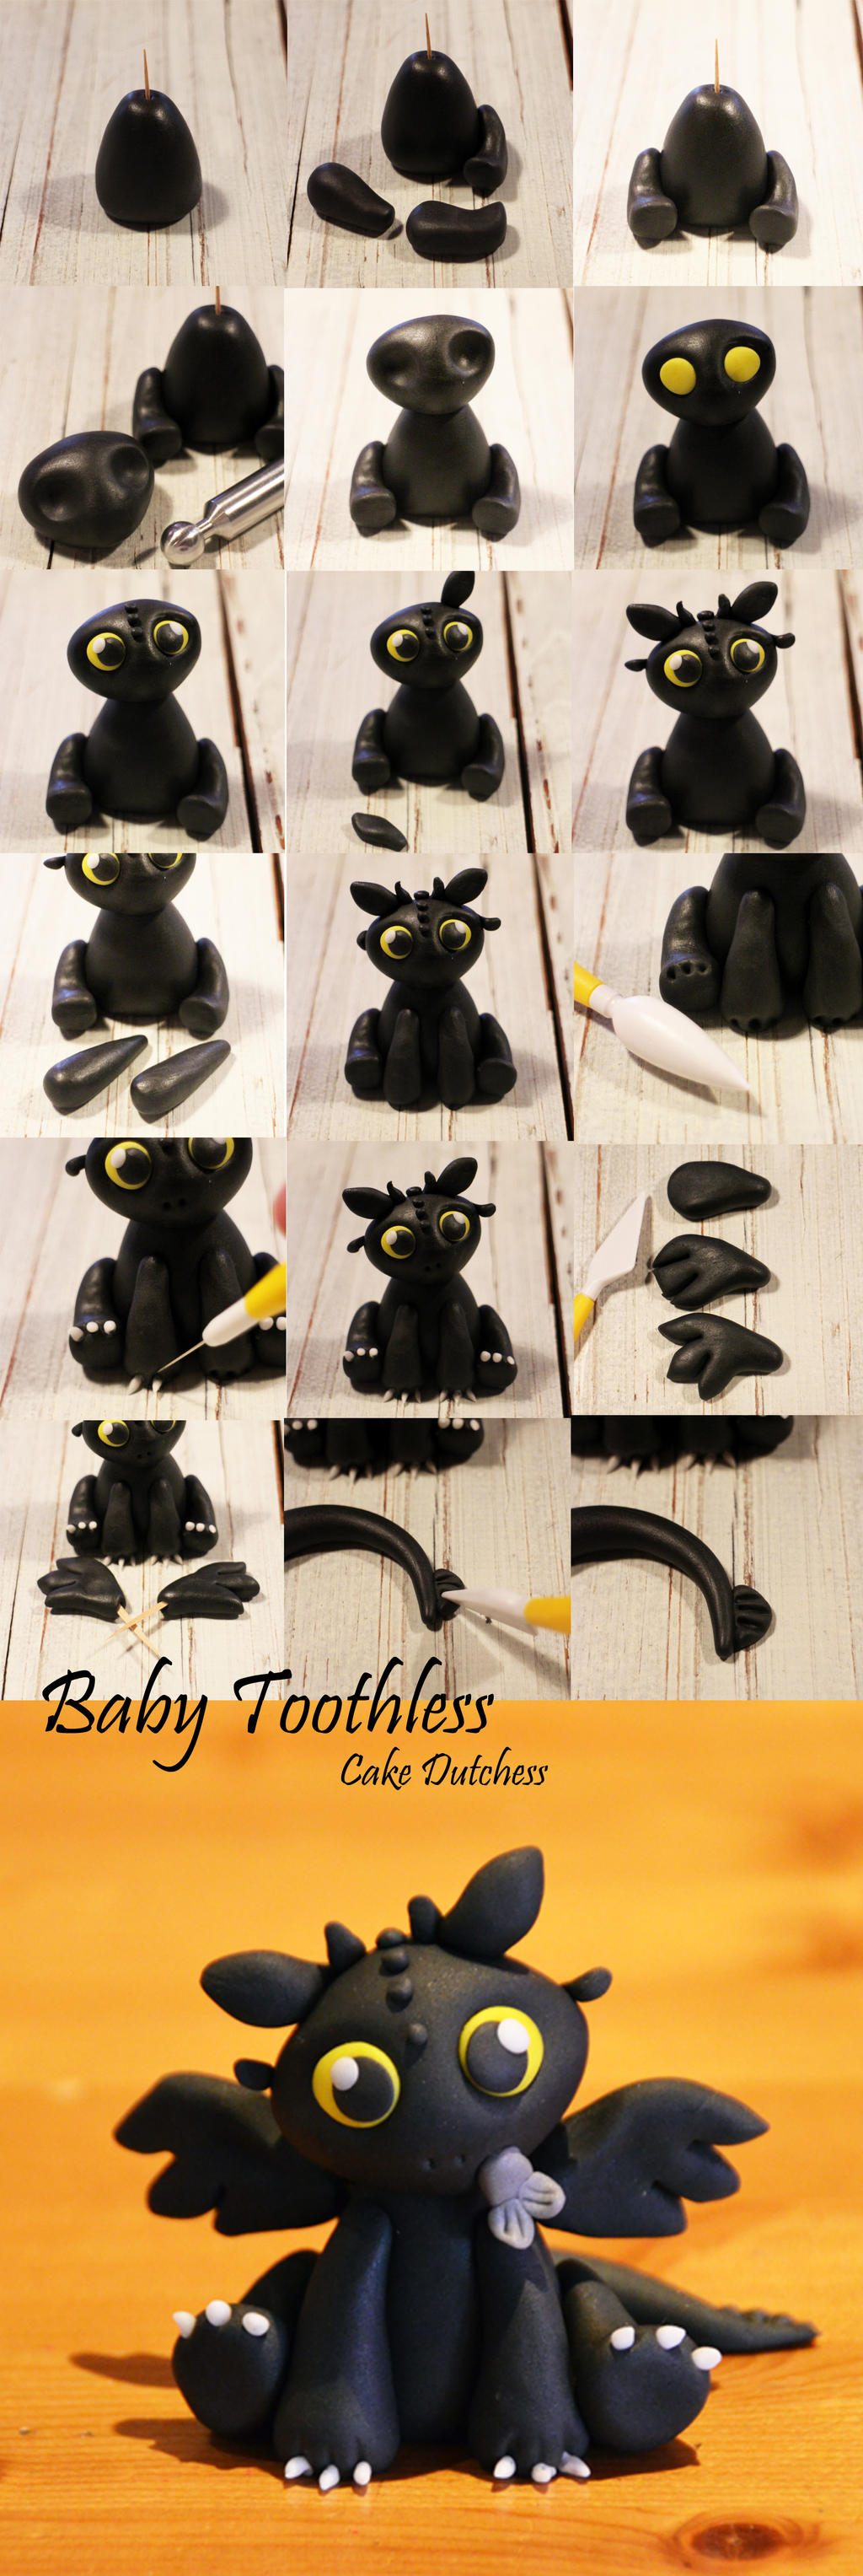 Baby Toothless Step by Step